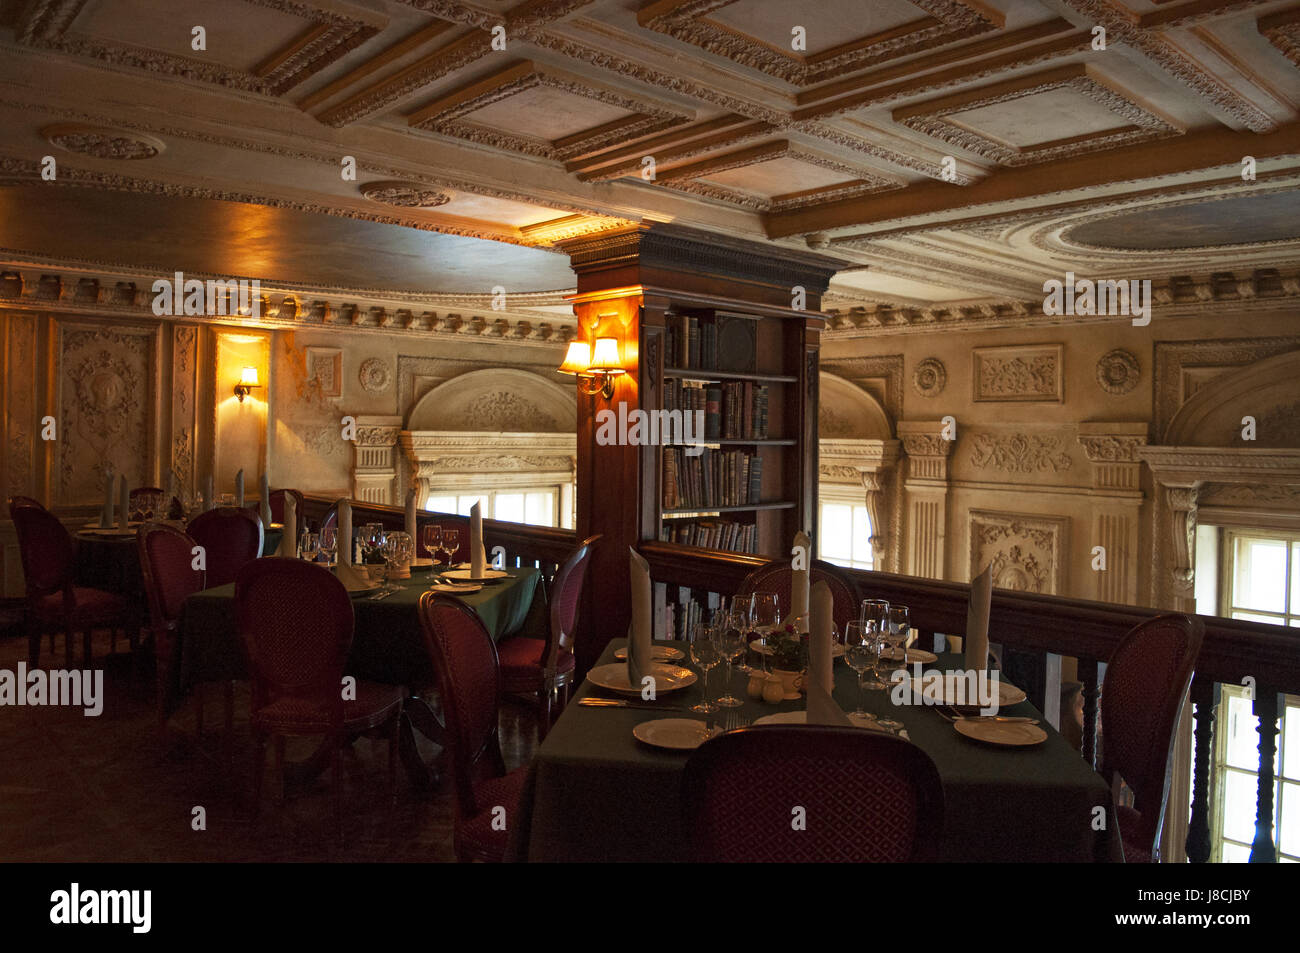 Moscow: the interiors of Cafe Pushkin, a famous restaurant and bar opened in 1999 inside a 19th-century Baroque mansion in the center of the city Stock Photo